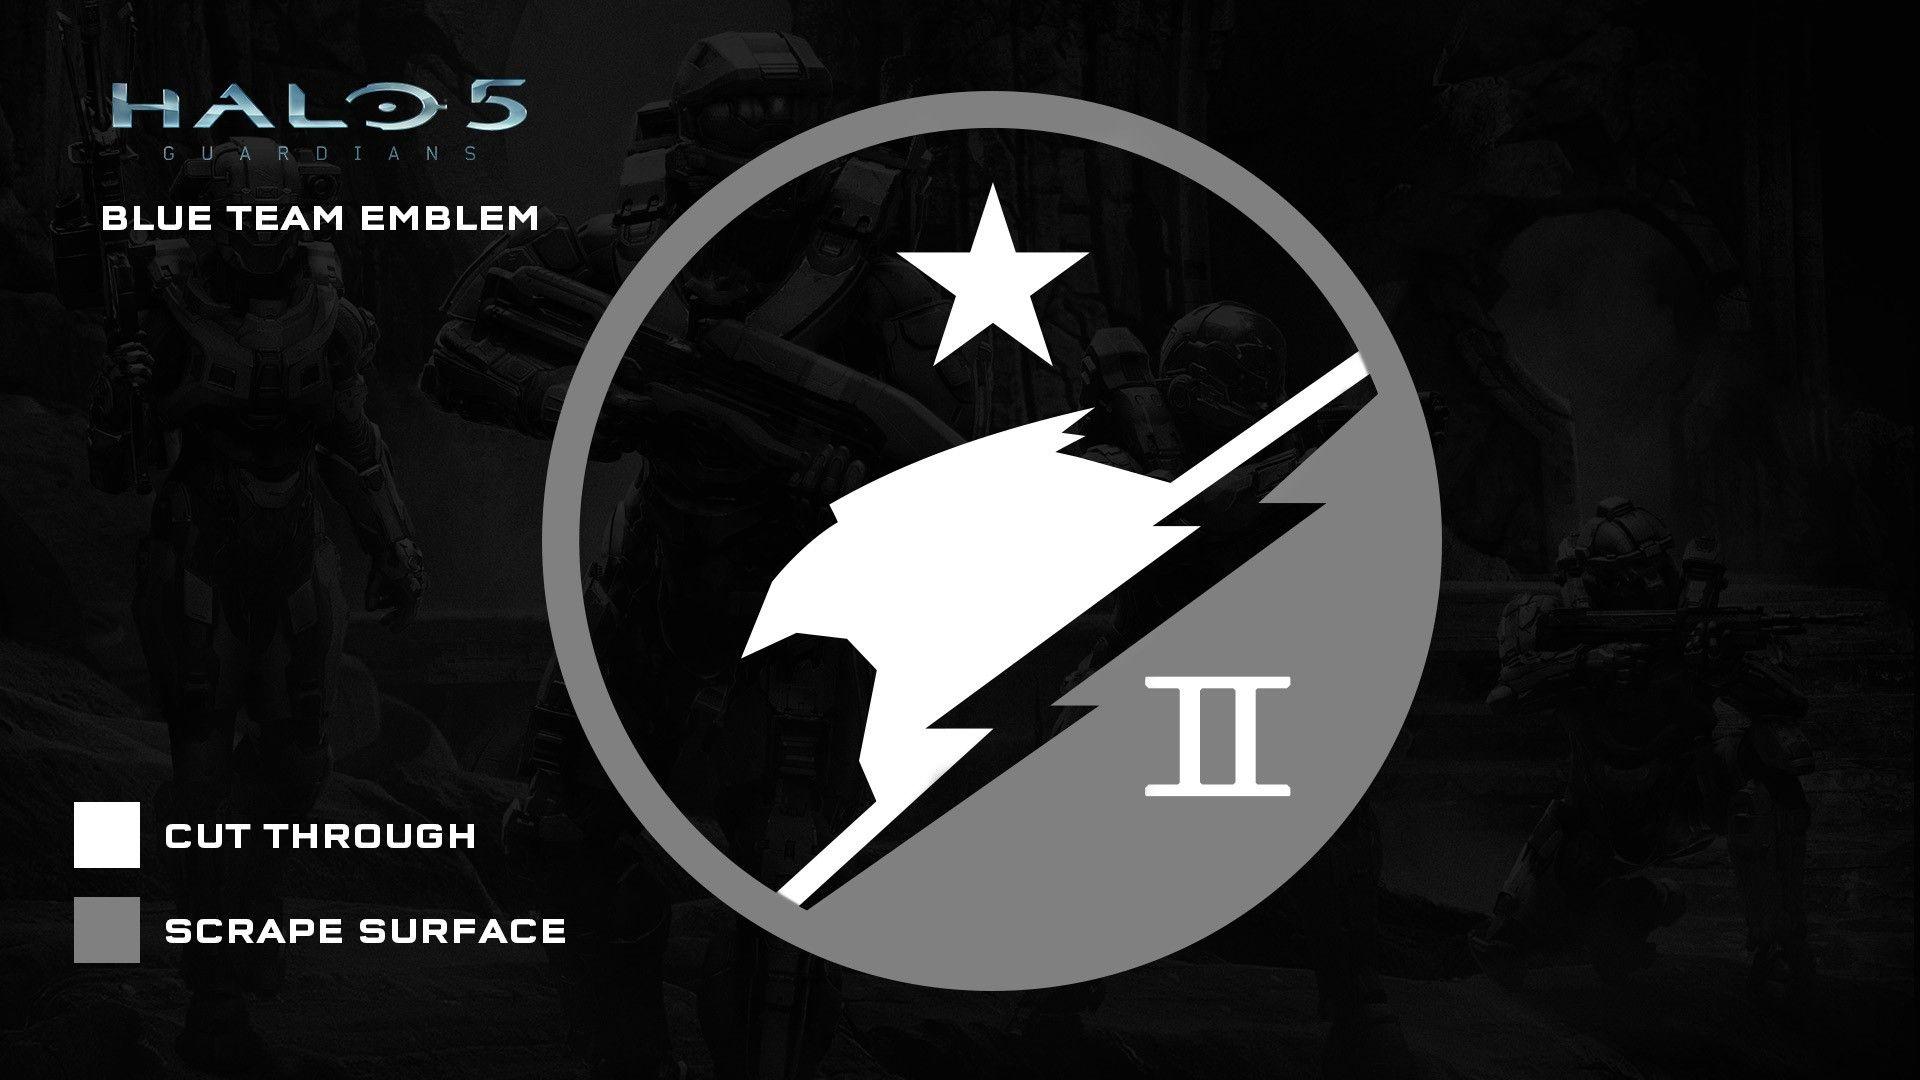 Blue and White ODST Logo - Post Launch Carnage Report. Halo Community Update. Halo